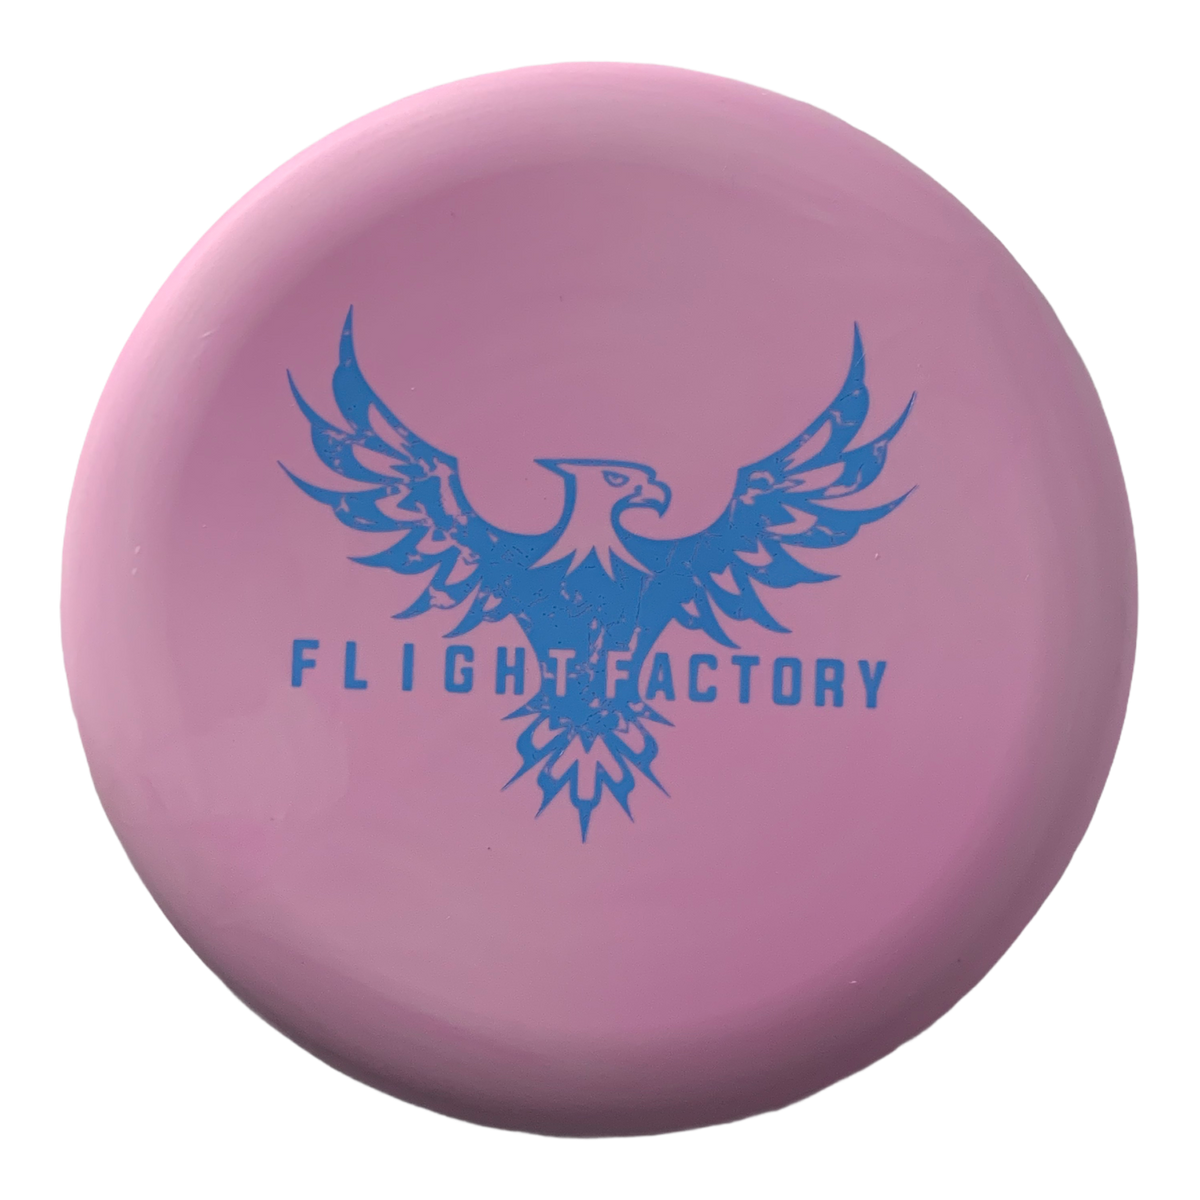 Flight Factory Eagle Legacy Protege Prowler